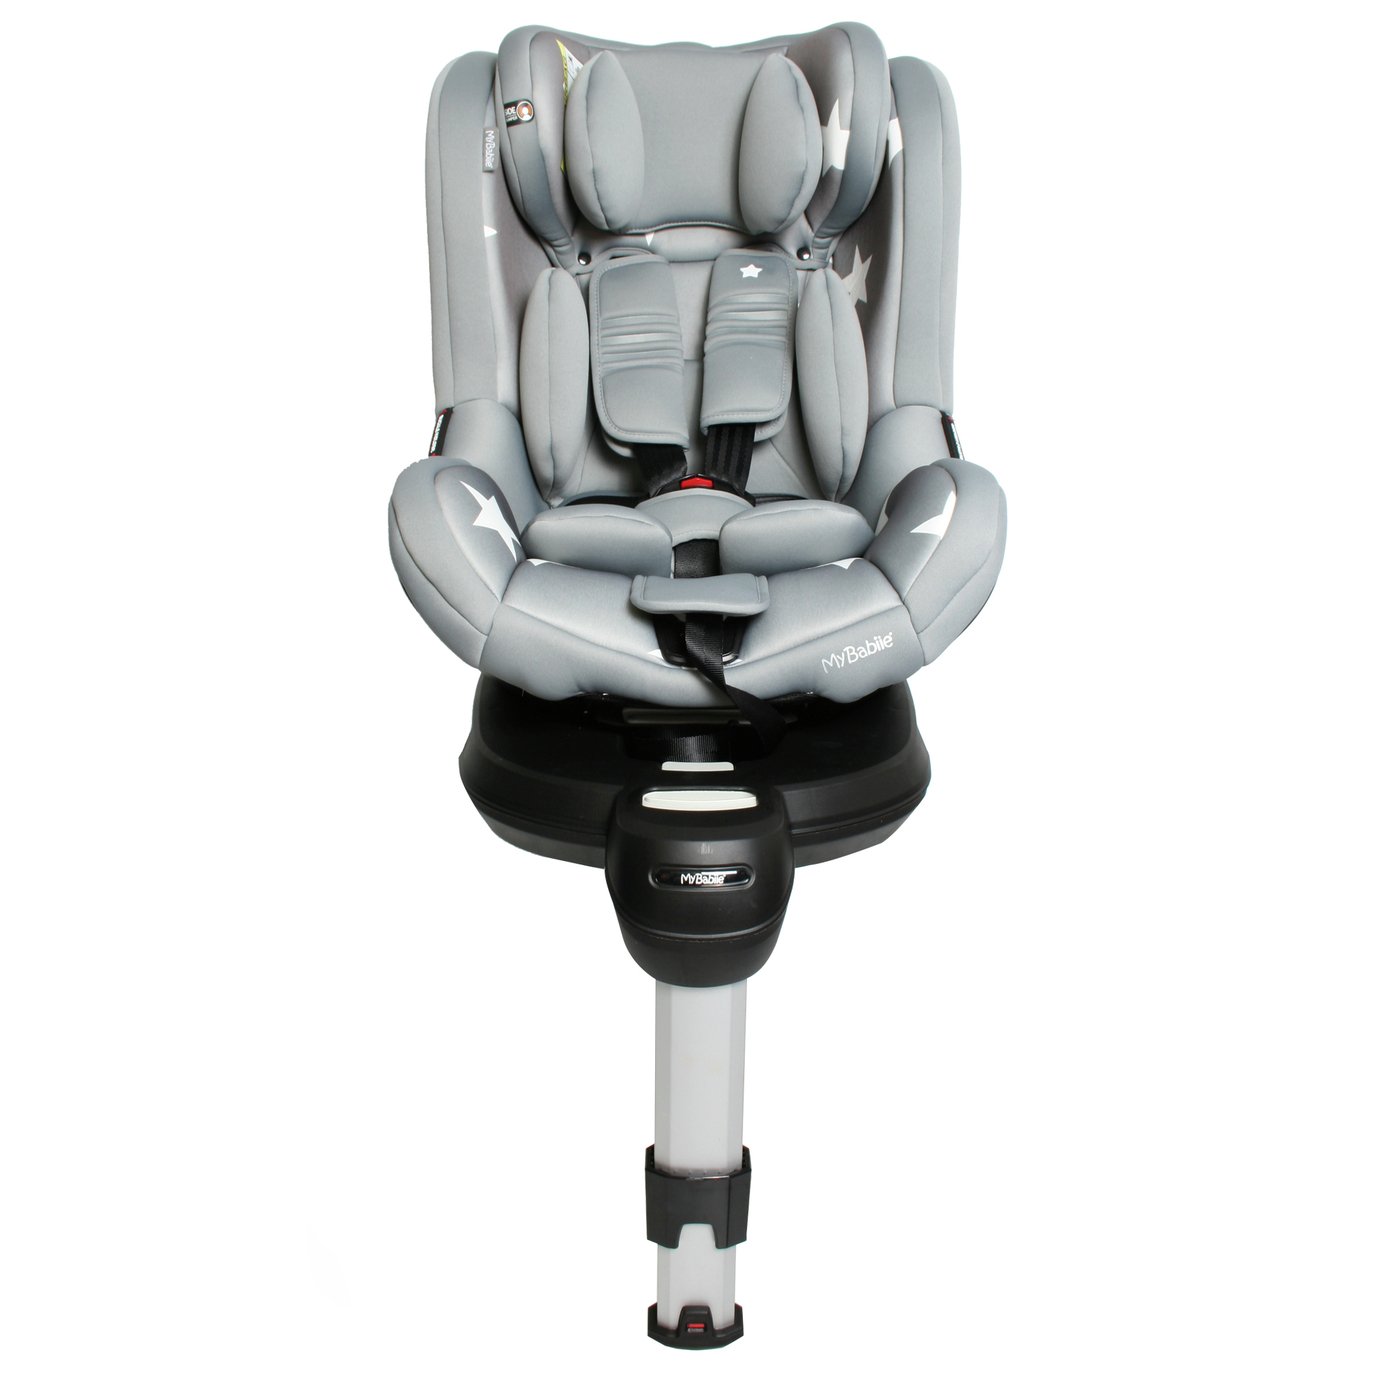 My Babiie Group 0+/1 ISOFIX Car Seat Review